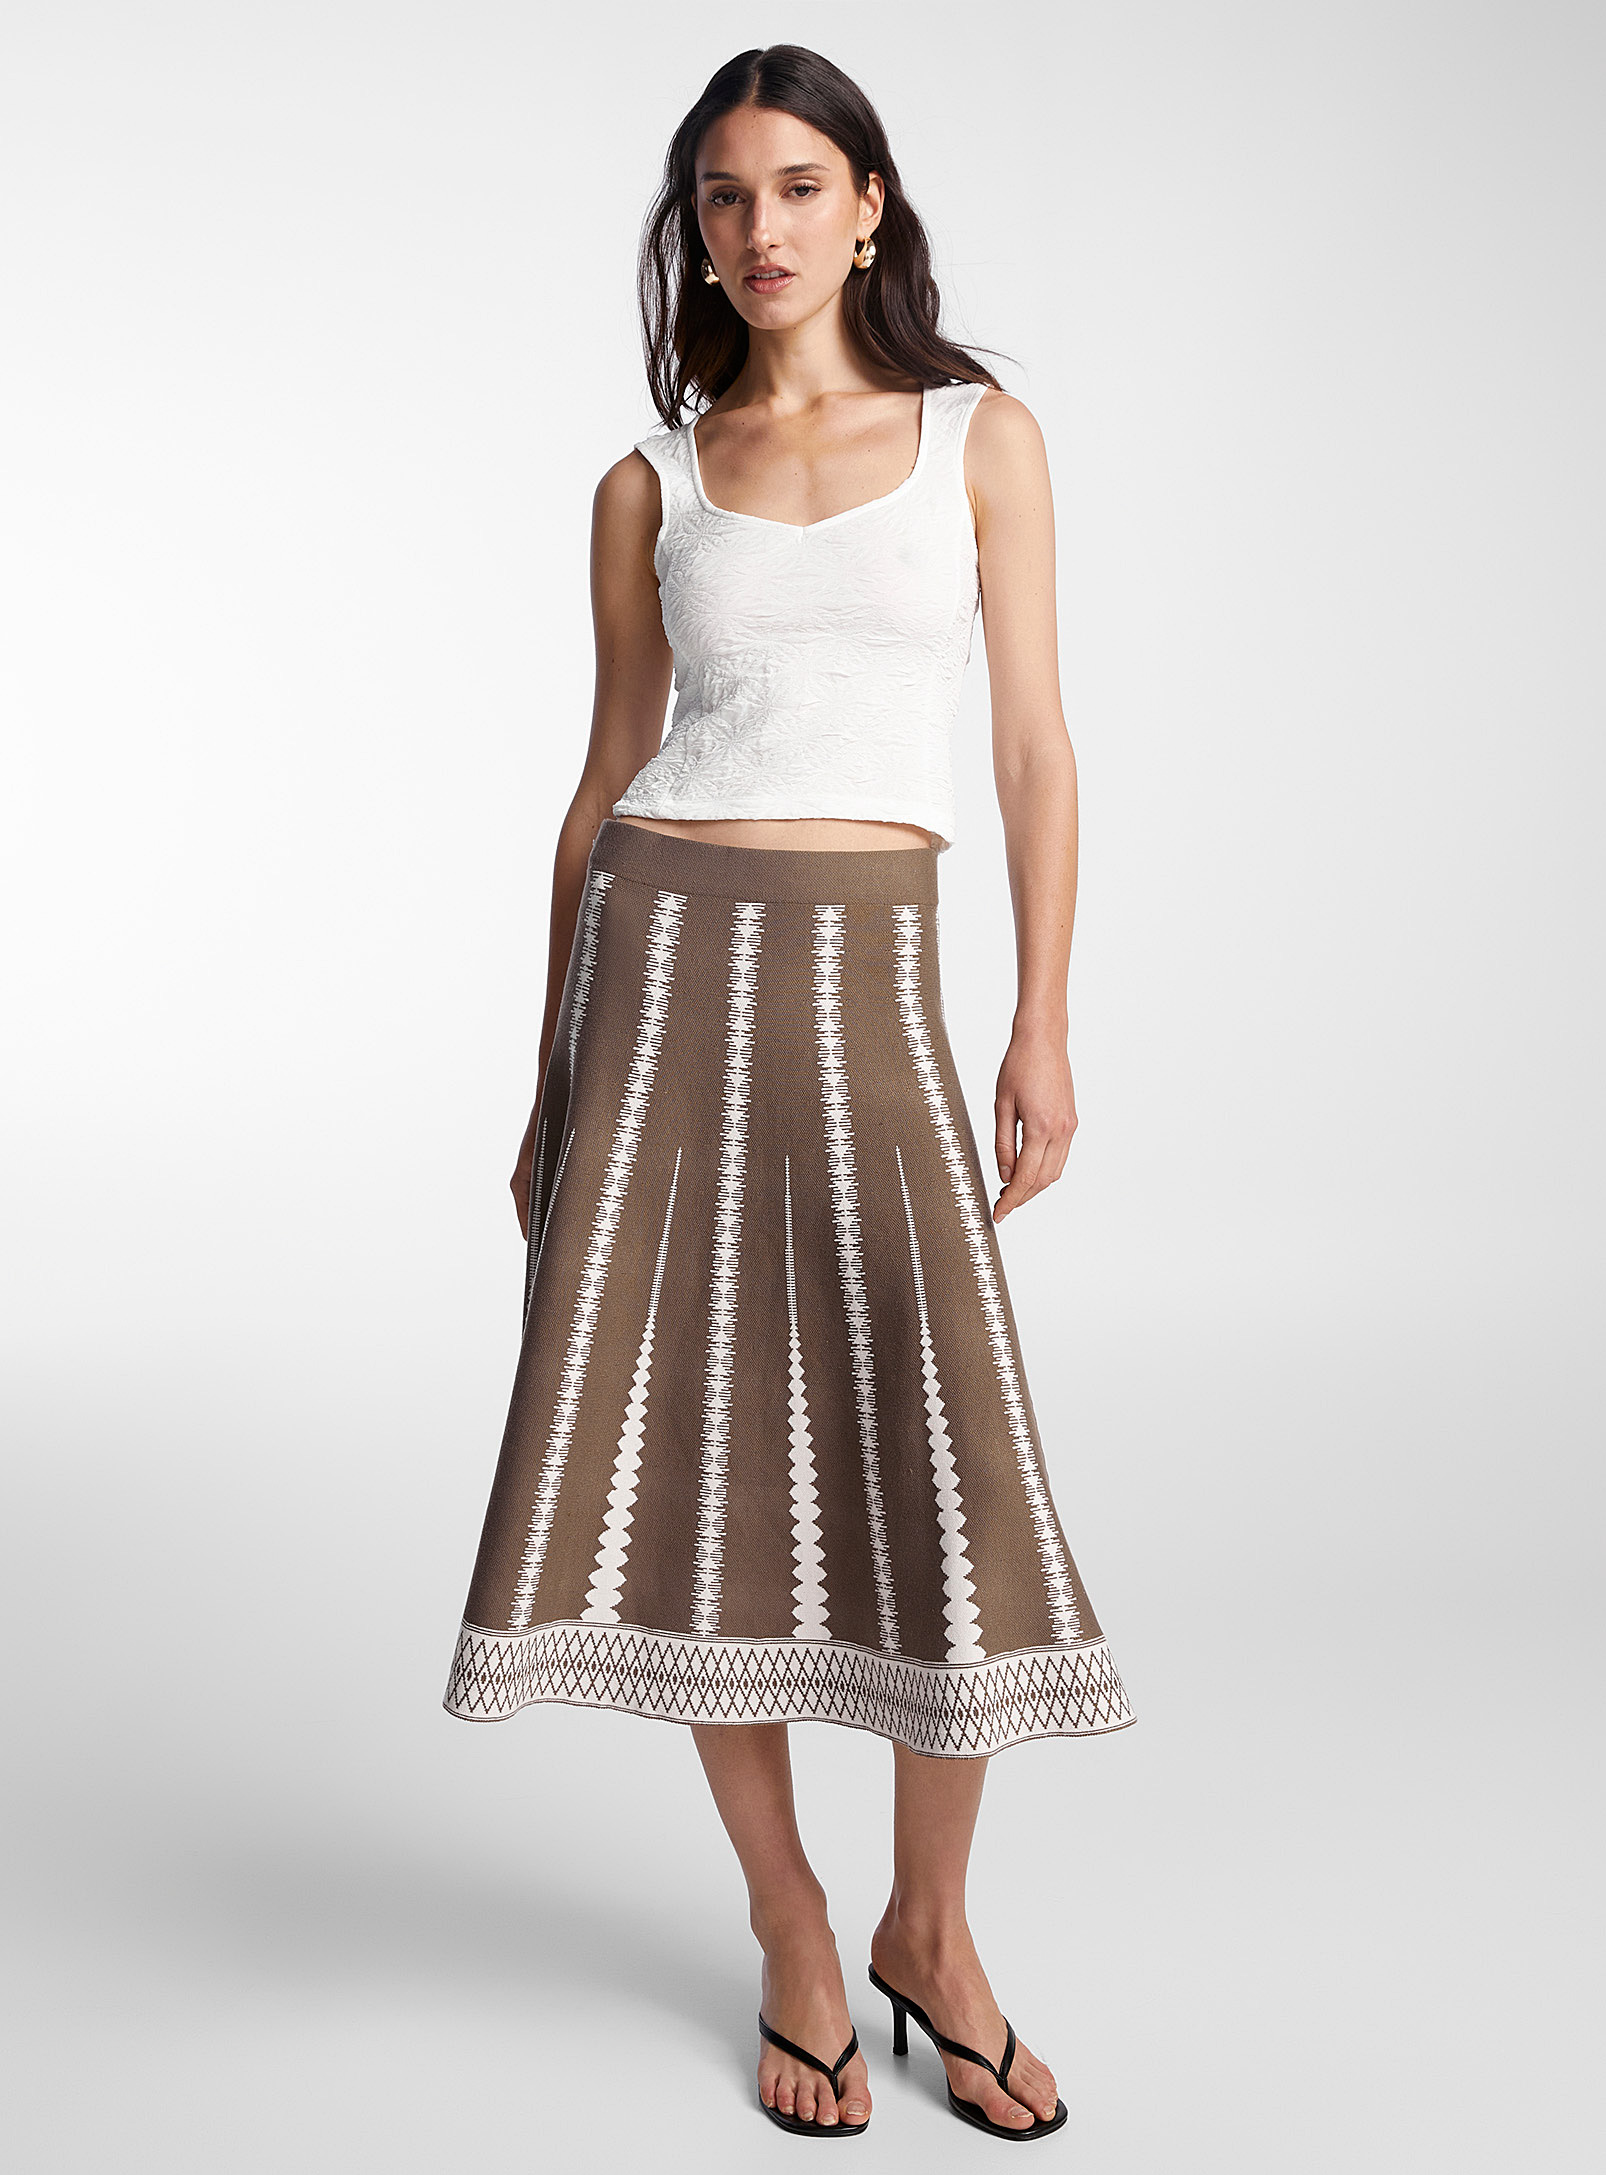 Icone Dense Jacquard Knit Flared Skirt In Patterned Brown